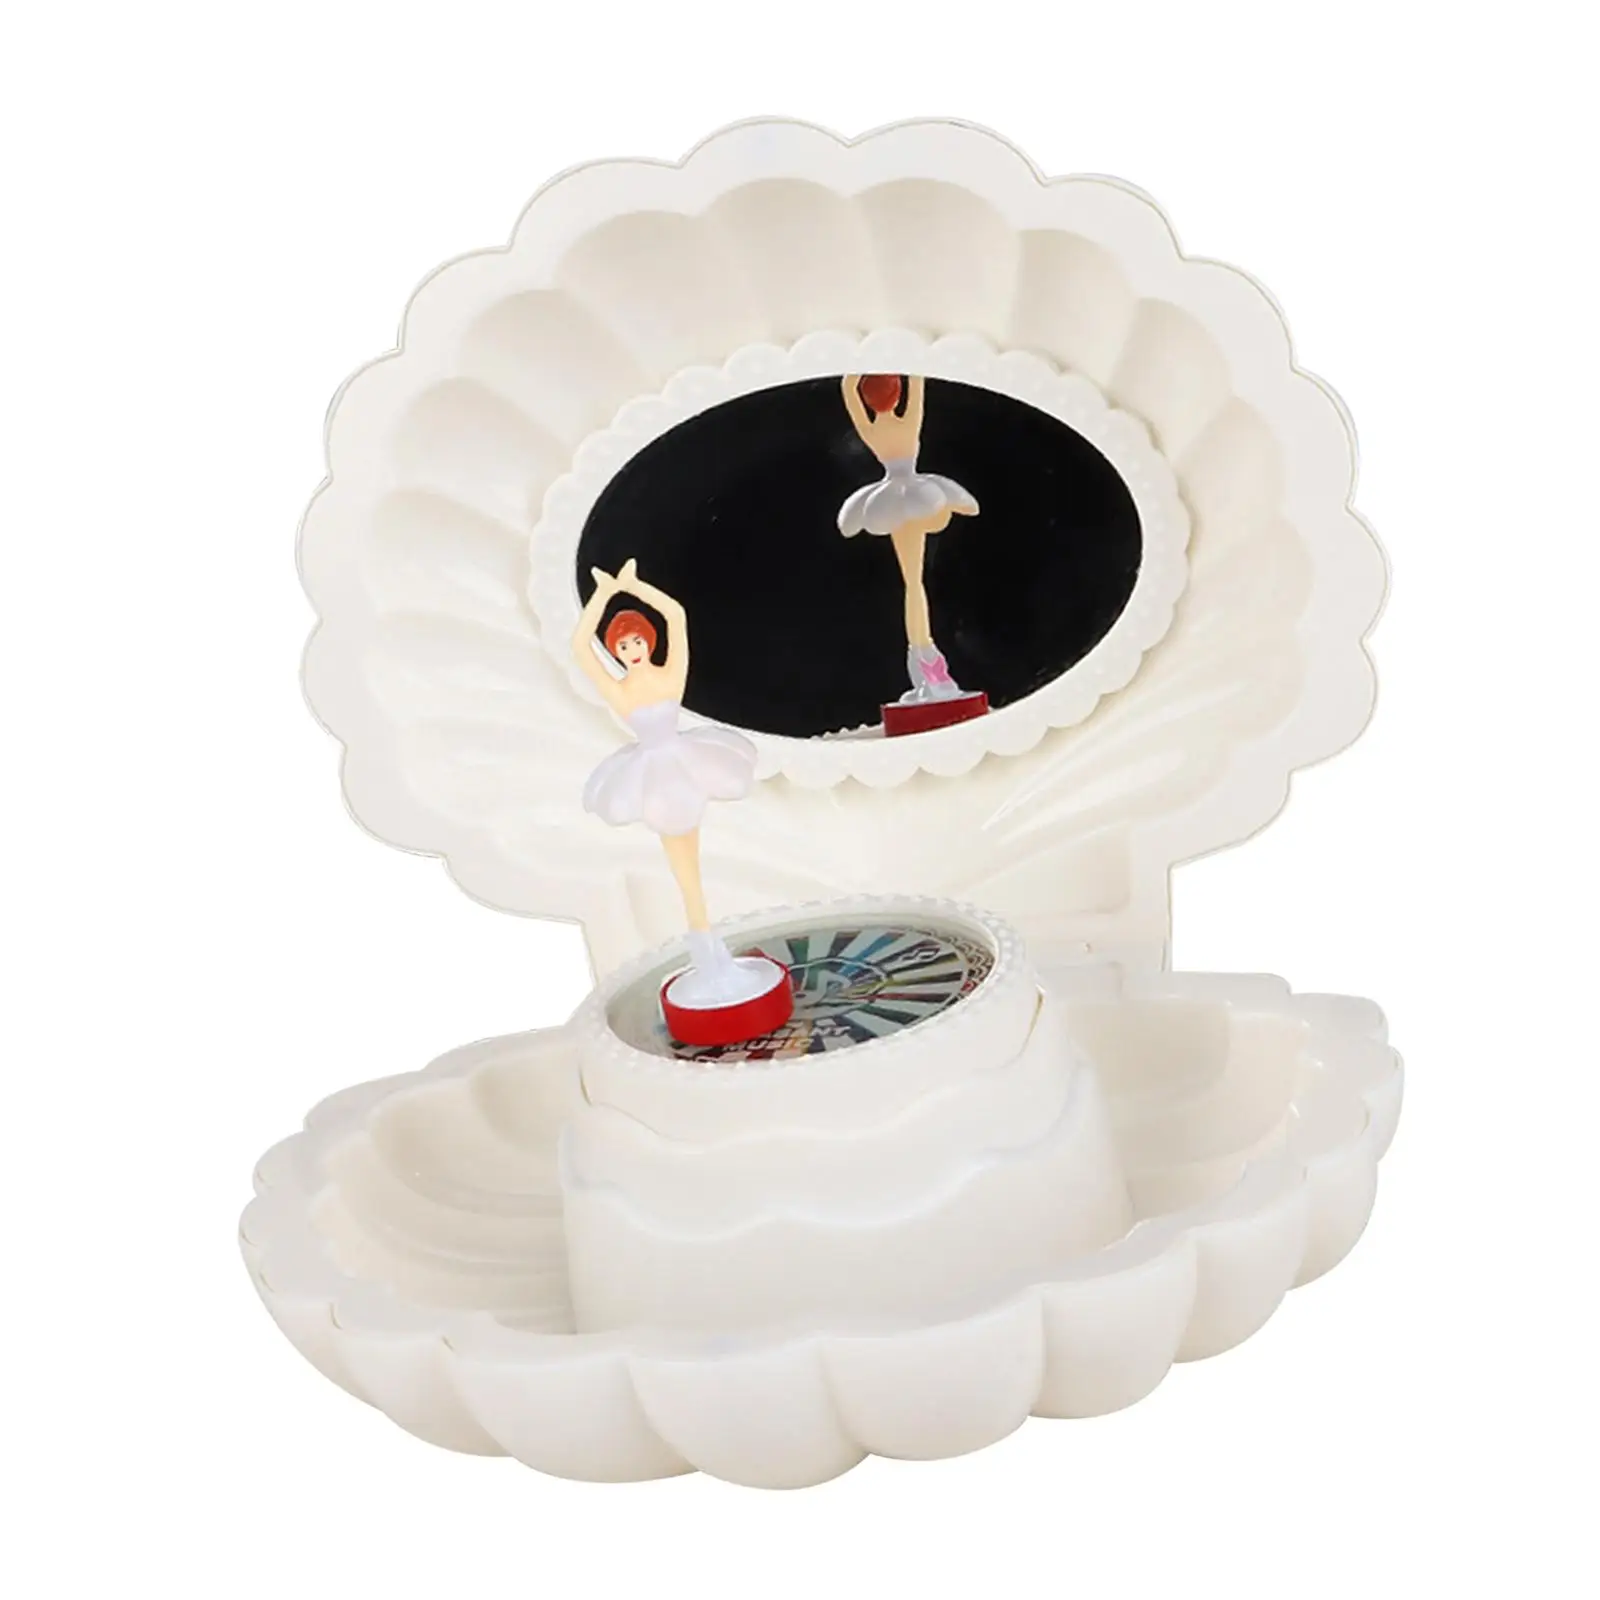 Shell Shaped Ballerina Storage Case Trinket Jewelry Box and Mirror Musical Trinket Box for Holidays Children Gift Decorative